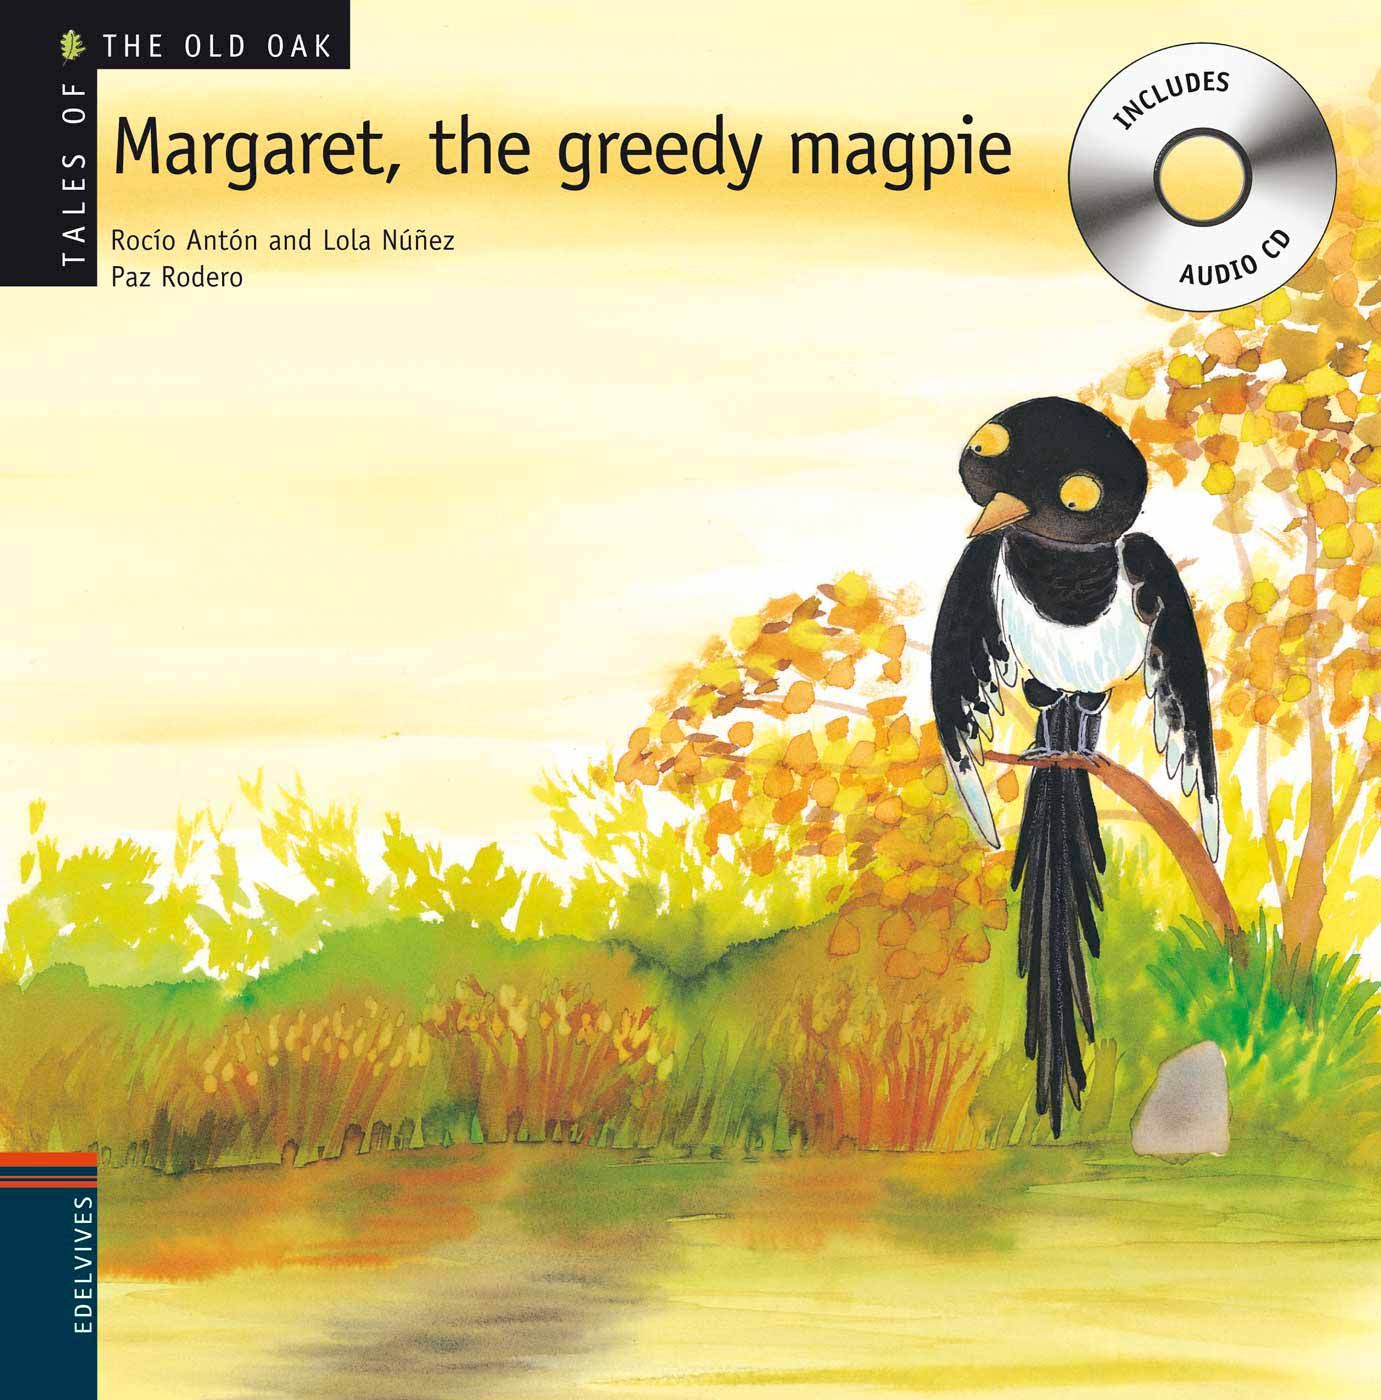 MARGARET, THE GREEDY MAGPIE. 